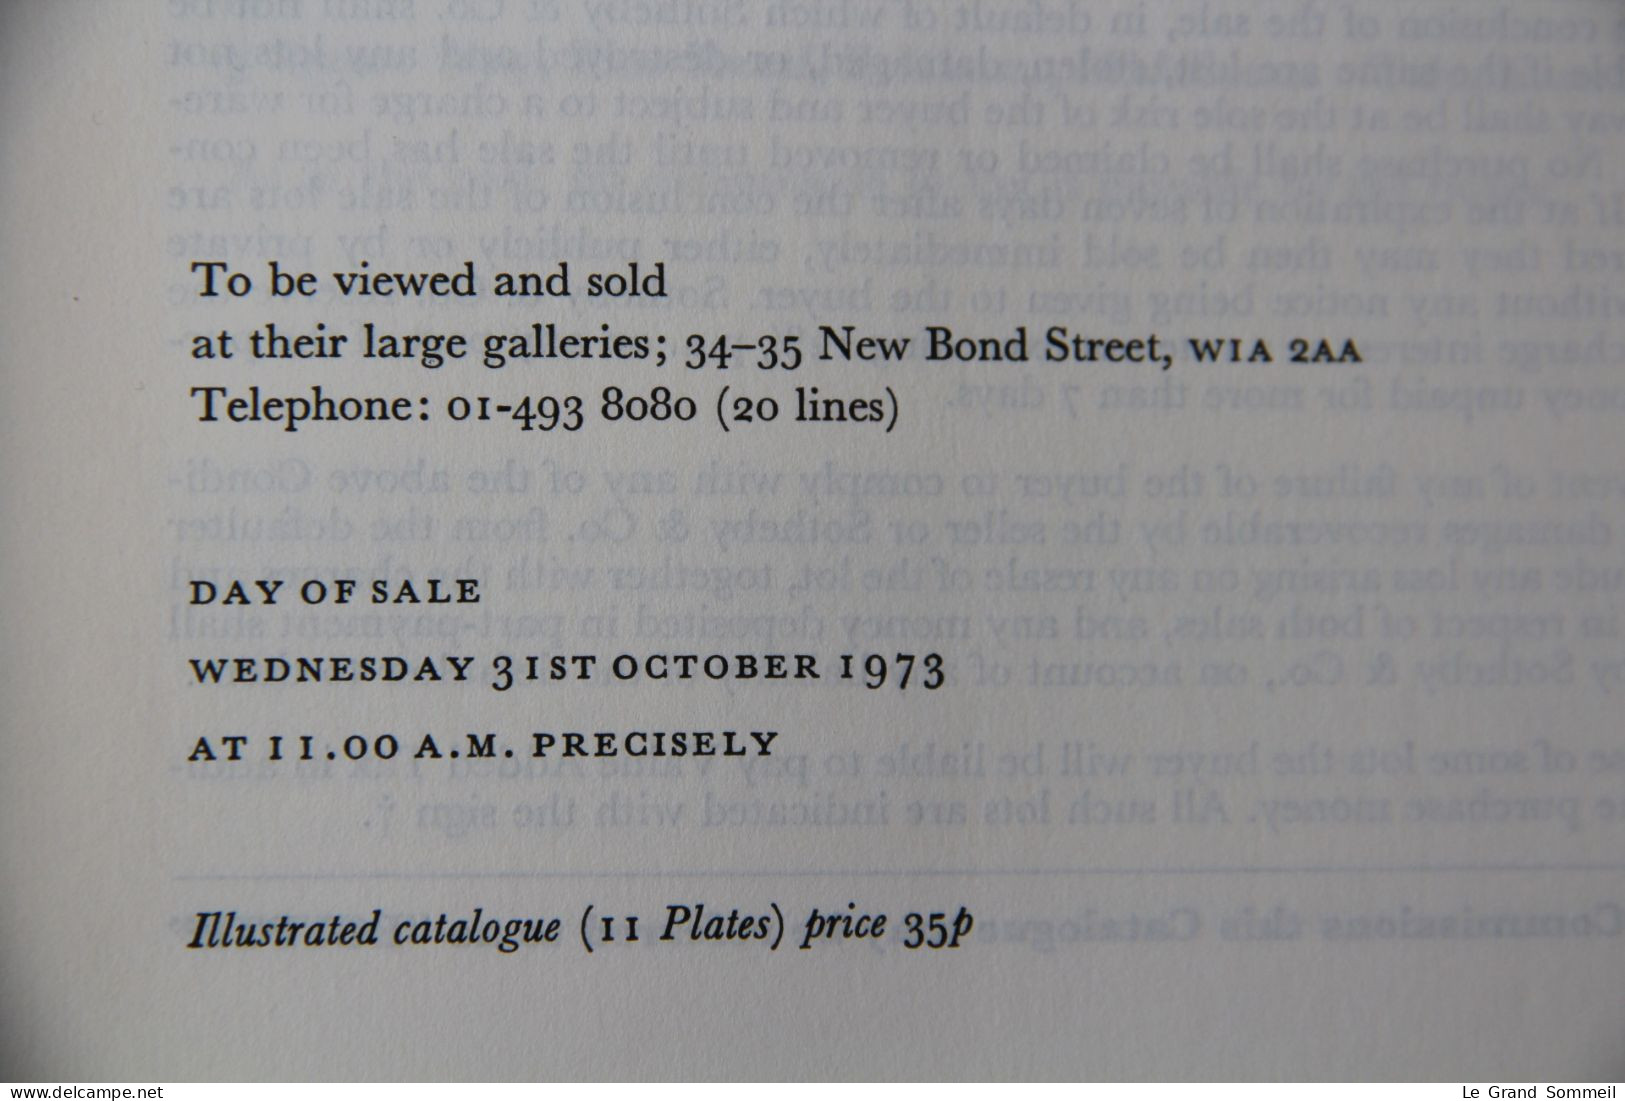 Sotheby&Co: 31/10/1973 catalogue of impressionist and modern paintings & drawings + Price list